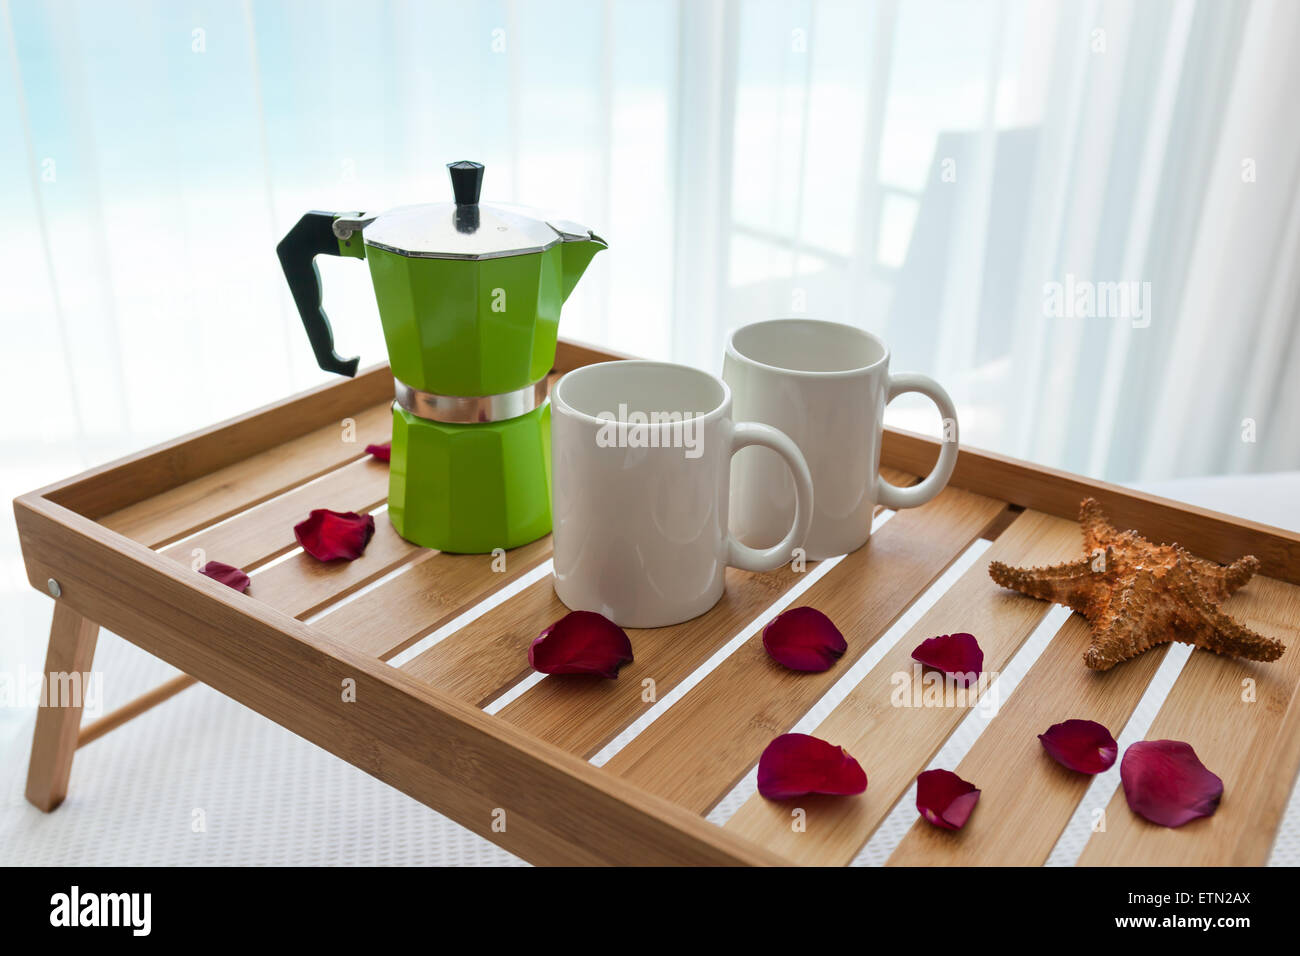 Breakfast wooden tray with coffee percolator and two cups on bed, decorated roses petals Stock Photo